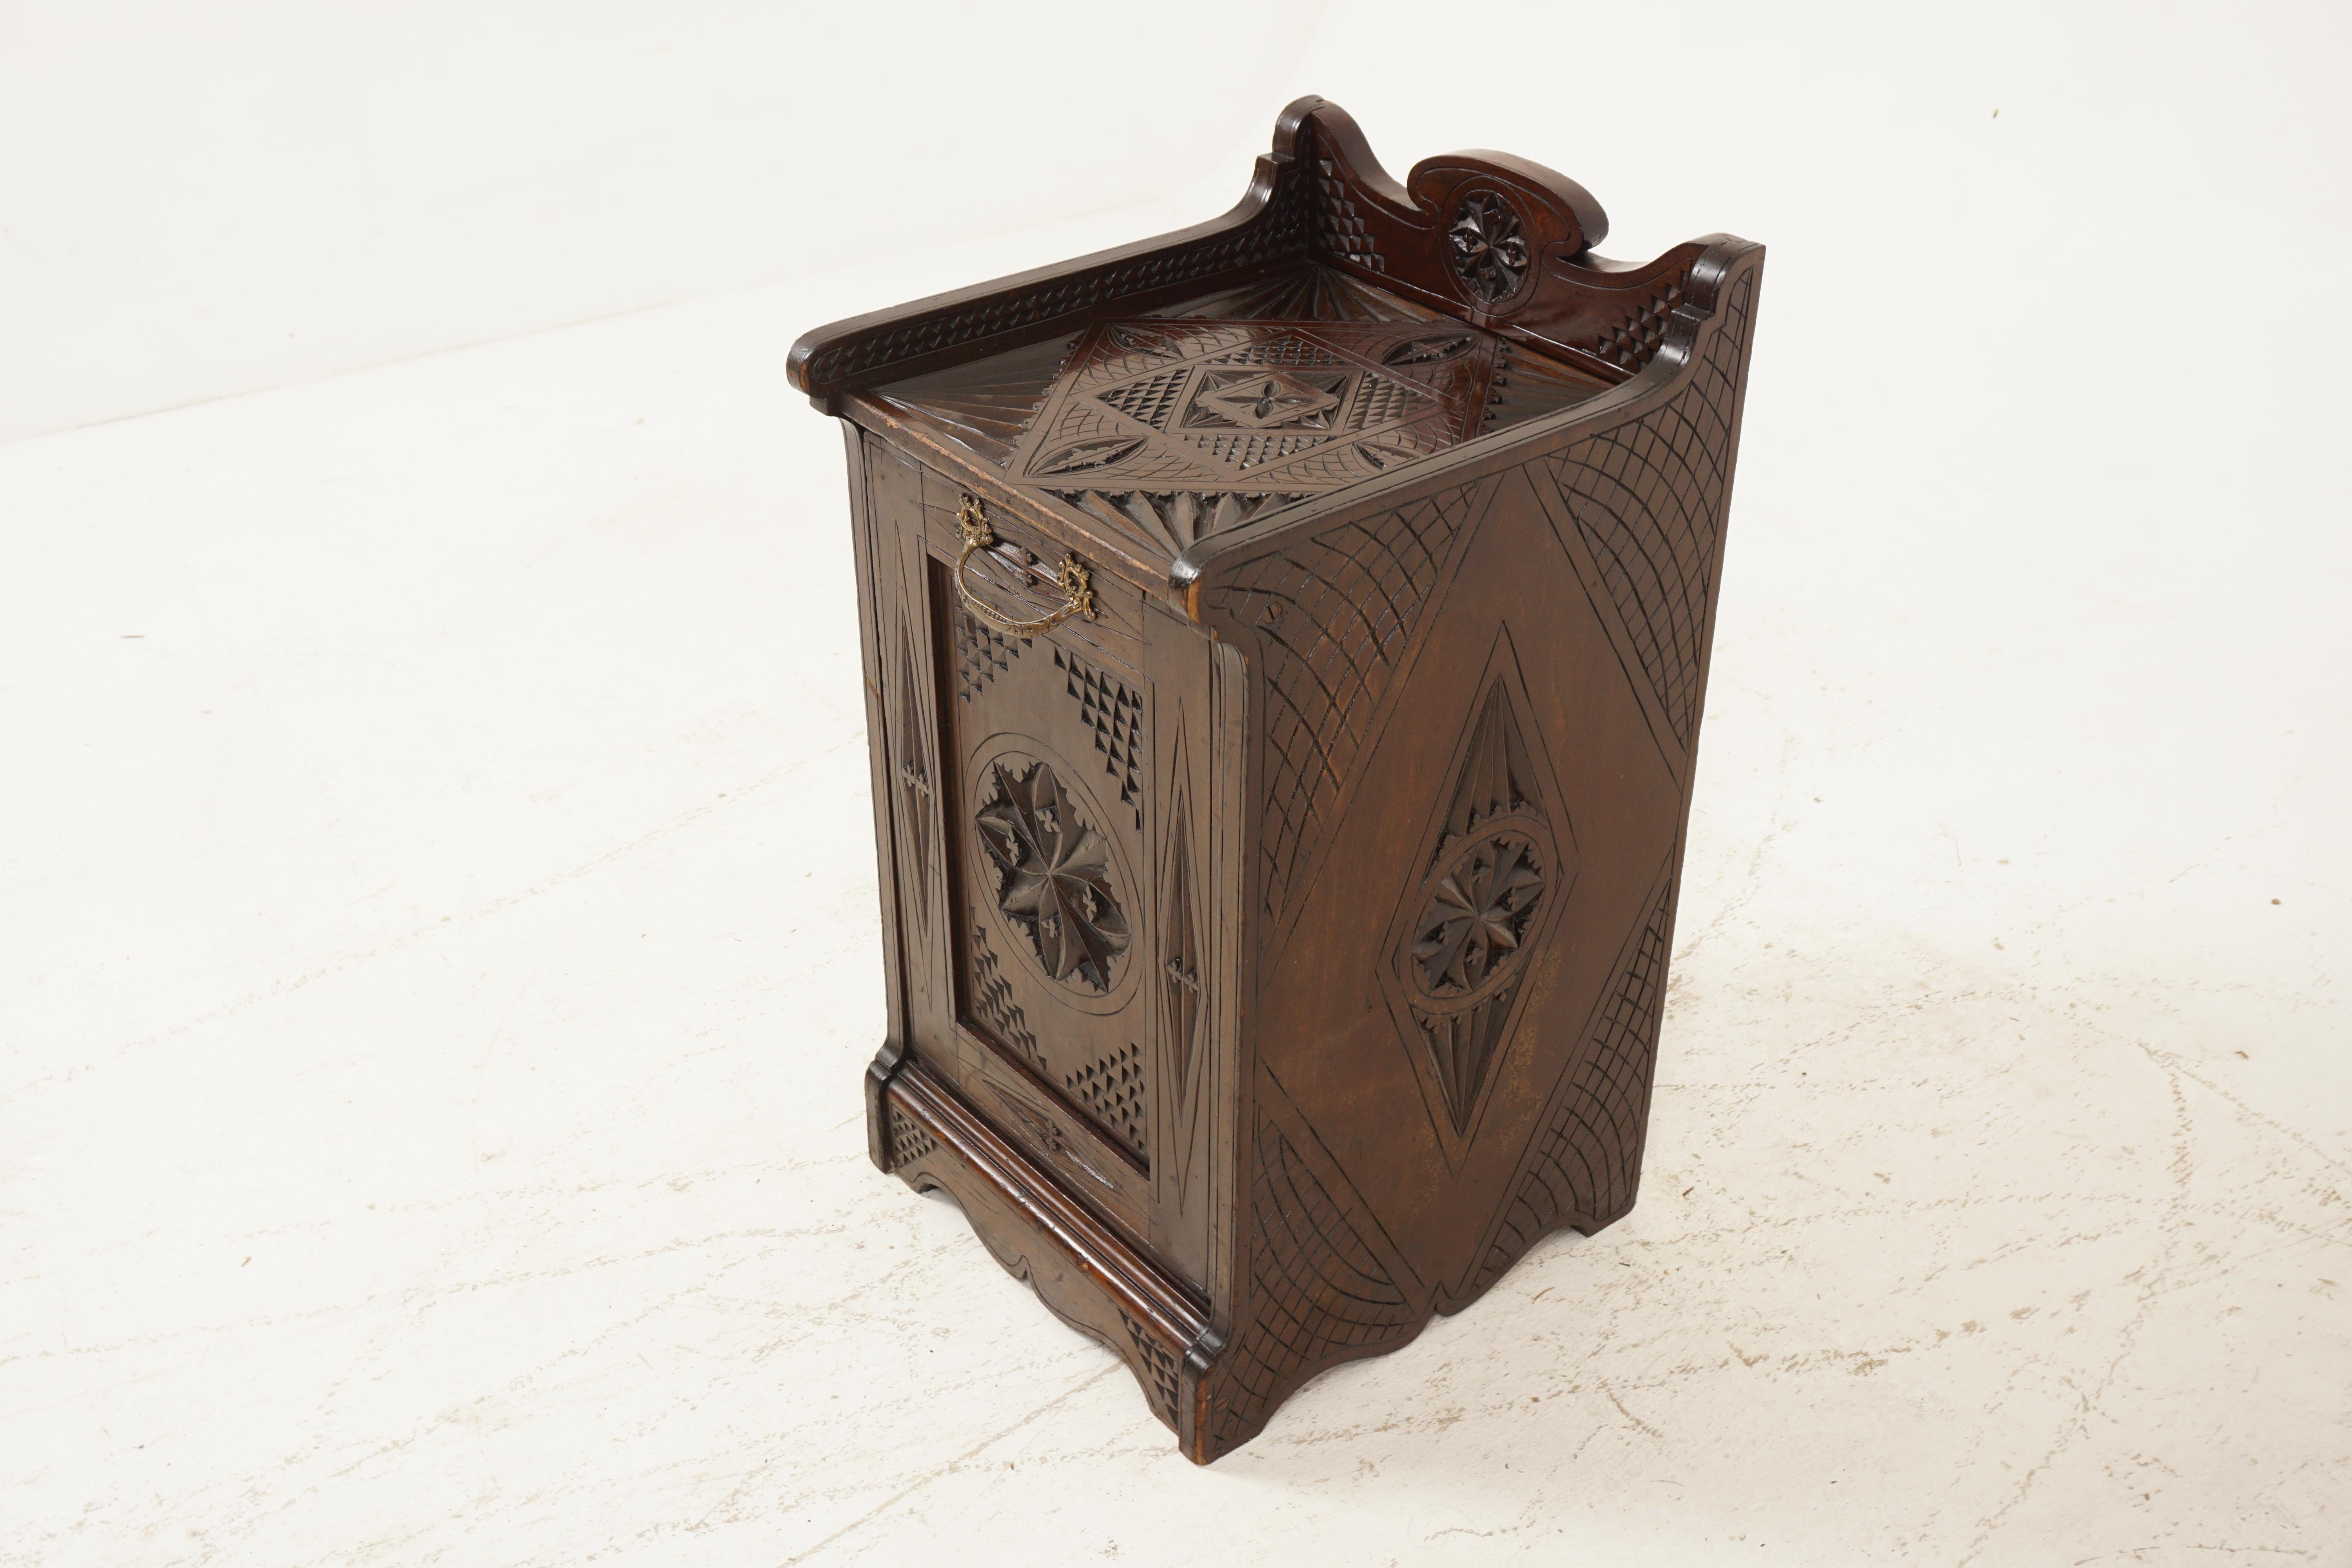 Antique Chipped Carved Coal Box, Scuttle Box, Purdonium, Scotland 1880, H268

Scotland 1880 
Solid Walnut
Original Finish 
Three Quarter Chipped Carved Gallery On Top
Carved Sides
Original Brass Handle On Front 
Carved Pull Down Front 
With Original